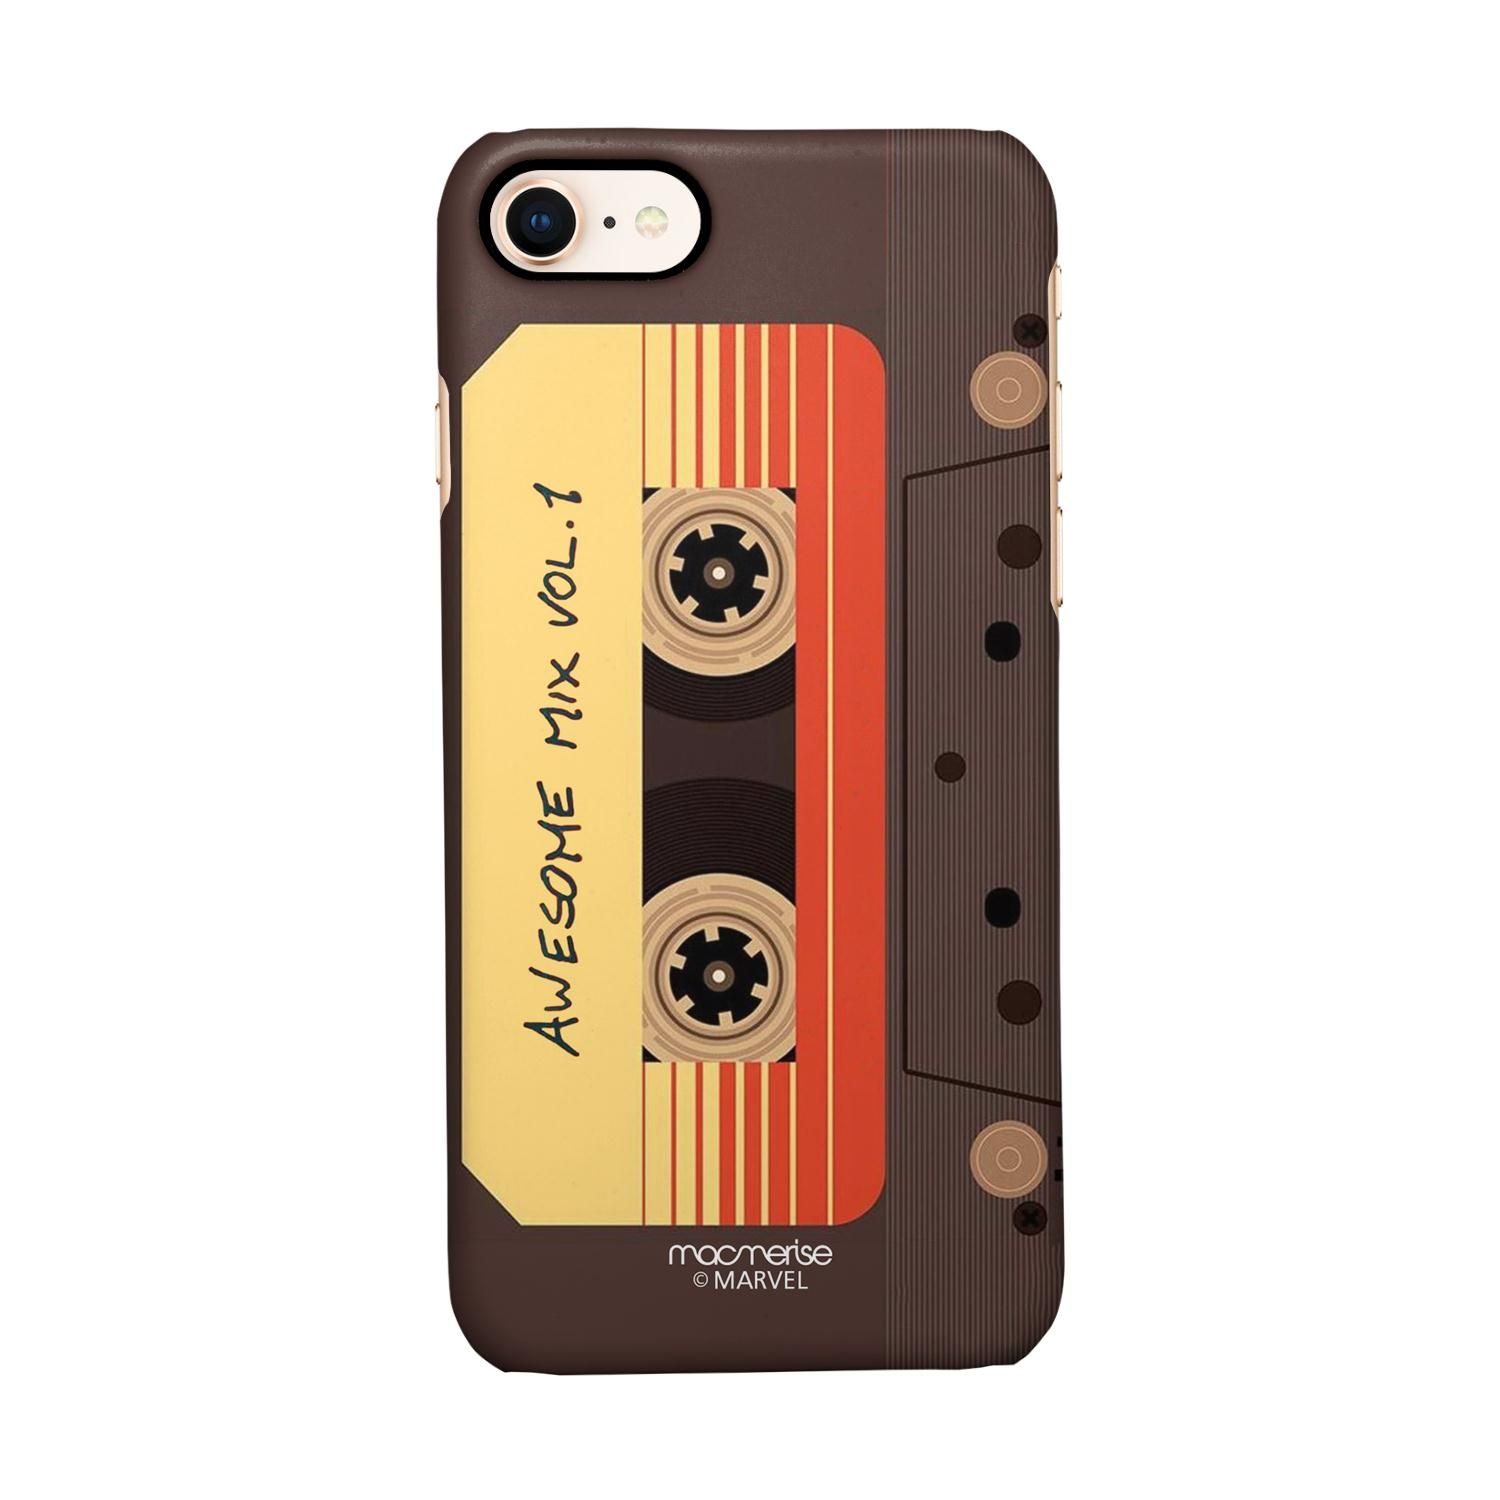 Buy Awesome Mix Tape - Sleek Phone Case for iPhone 7 Online